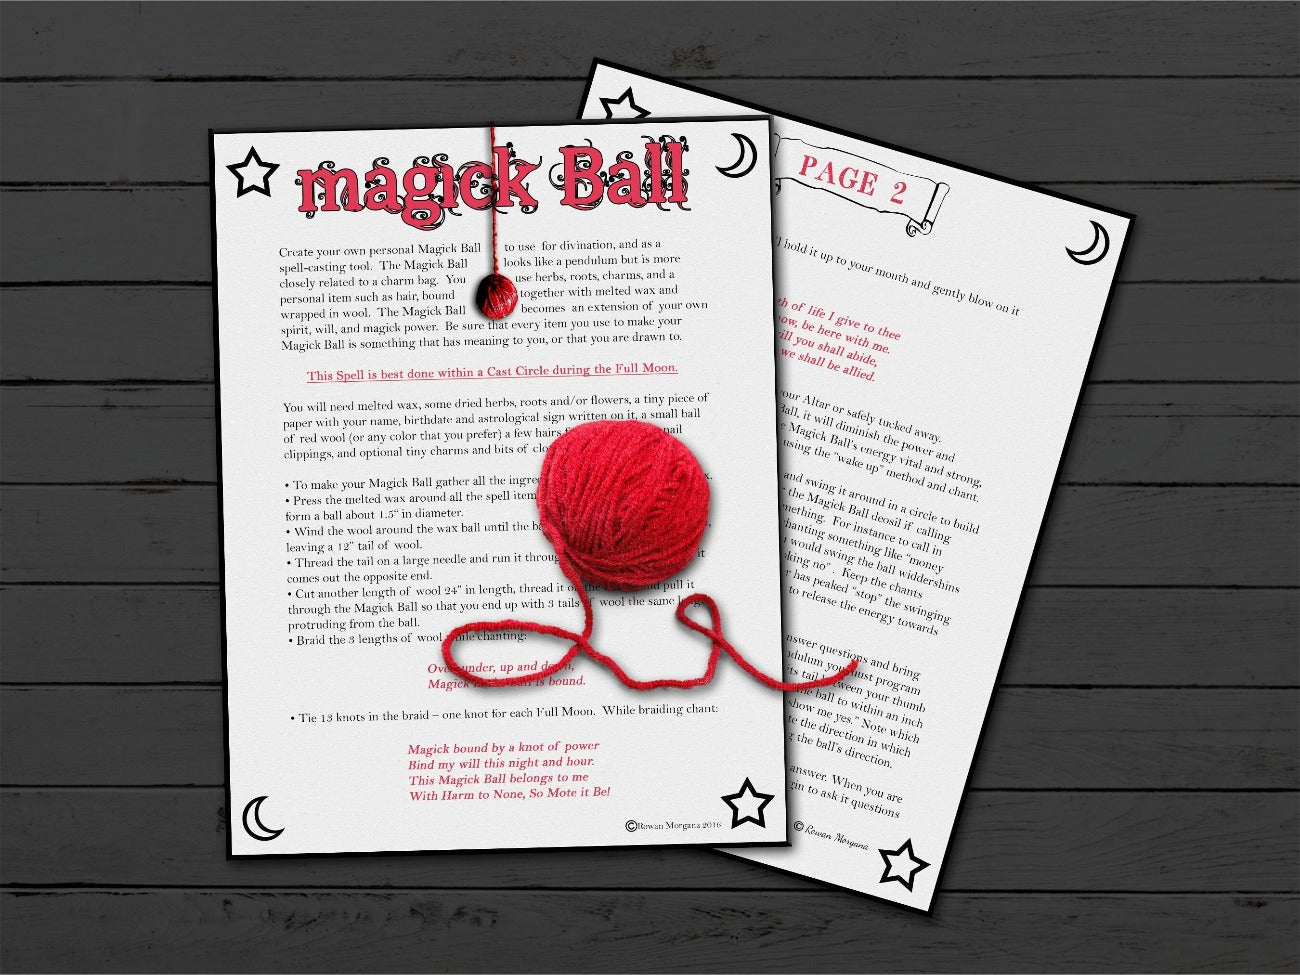 MAGICK BALL DIVINATION Complete Instructions to make a Jack Ball Pendulum, Melted Wax Divination, Old Witchcraft, Rootwork Conjur - Morgana Magick Spell